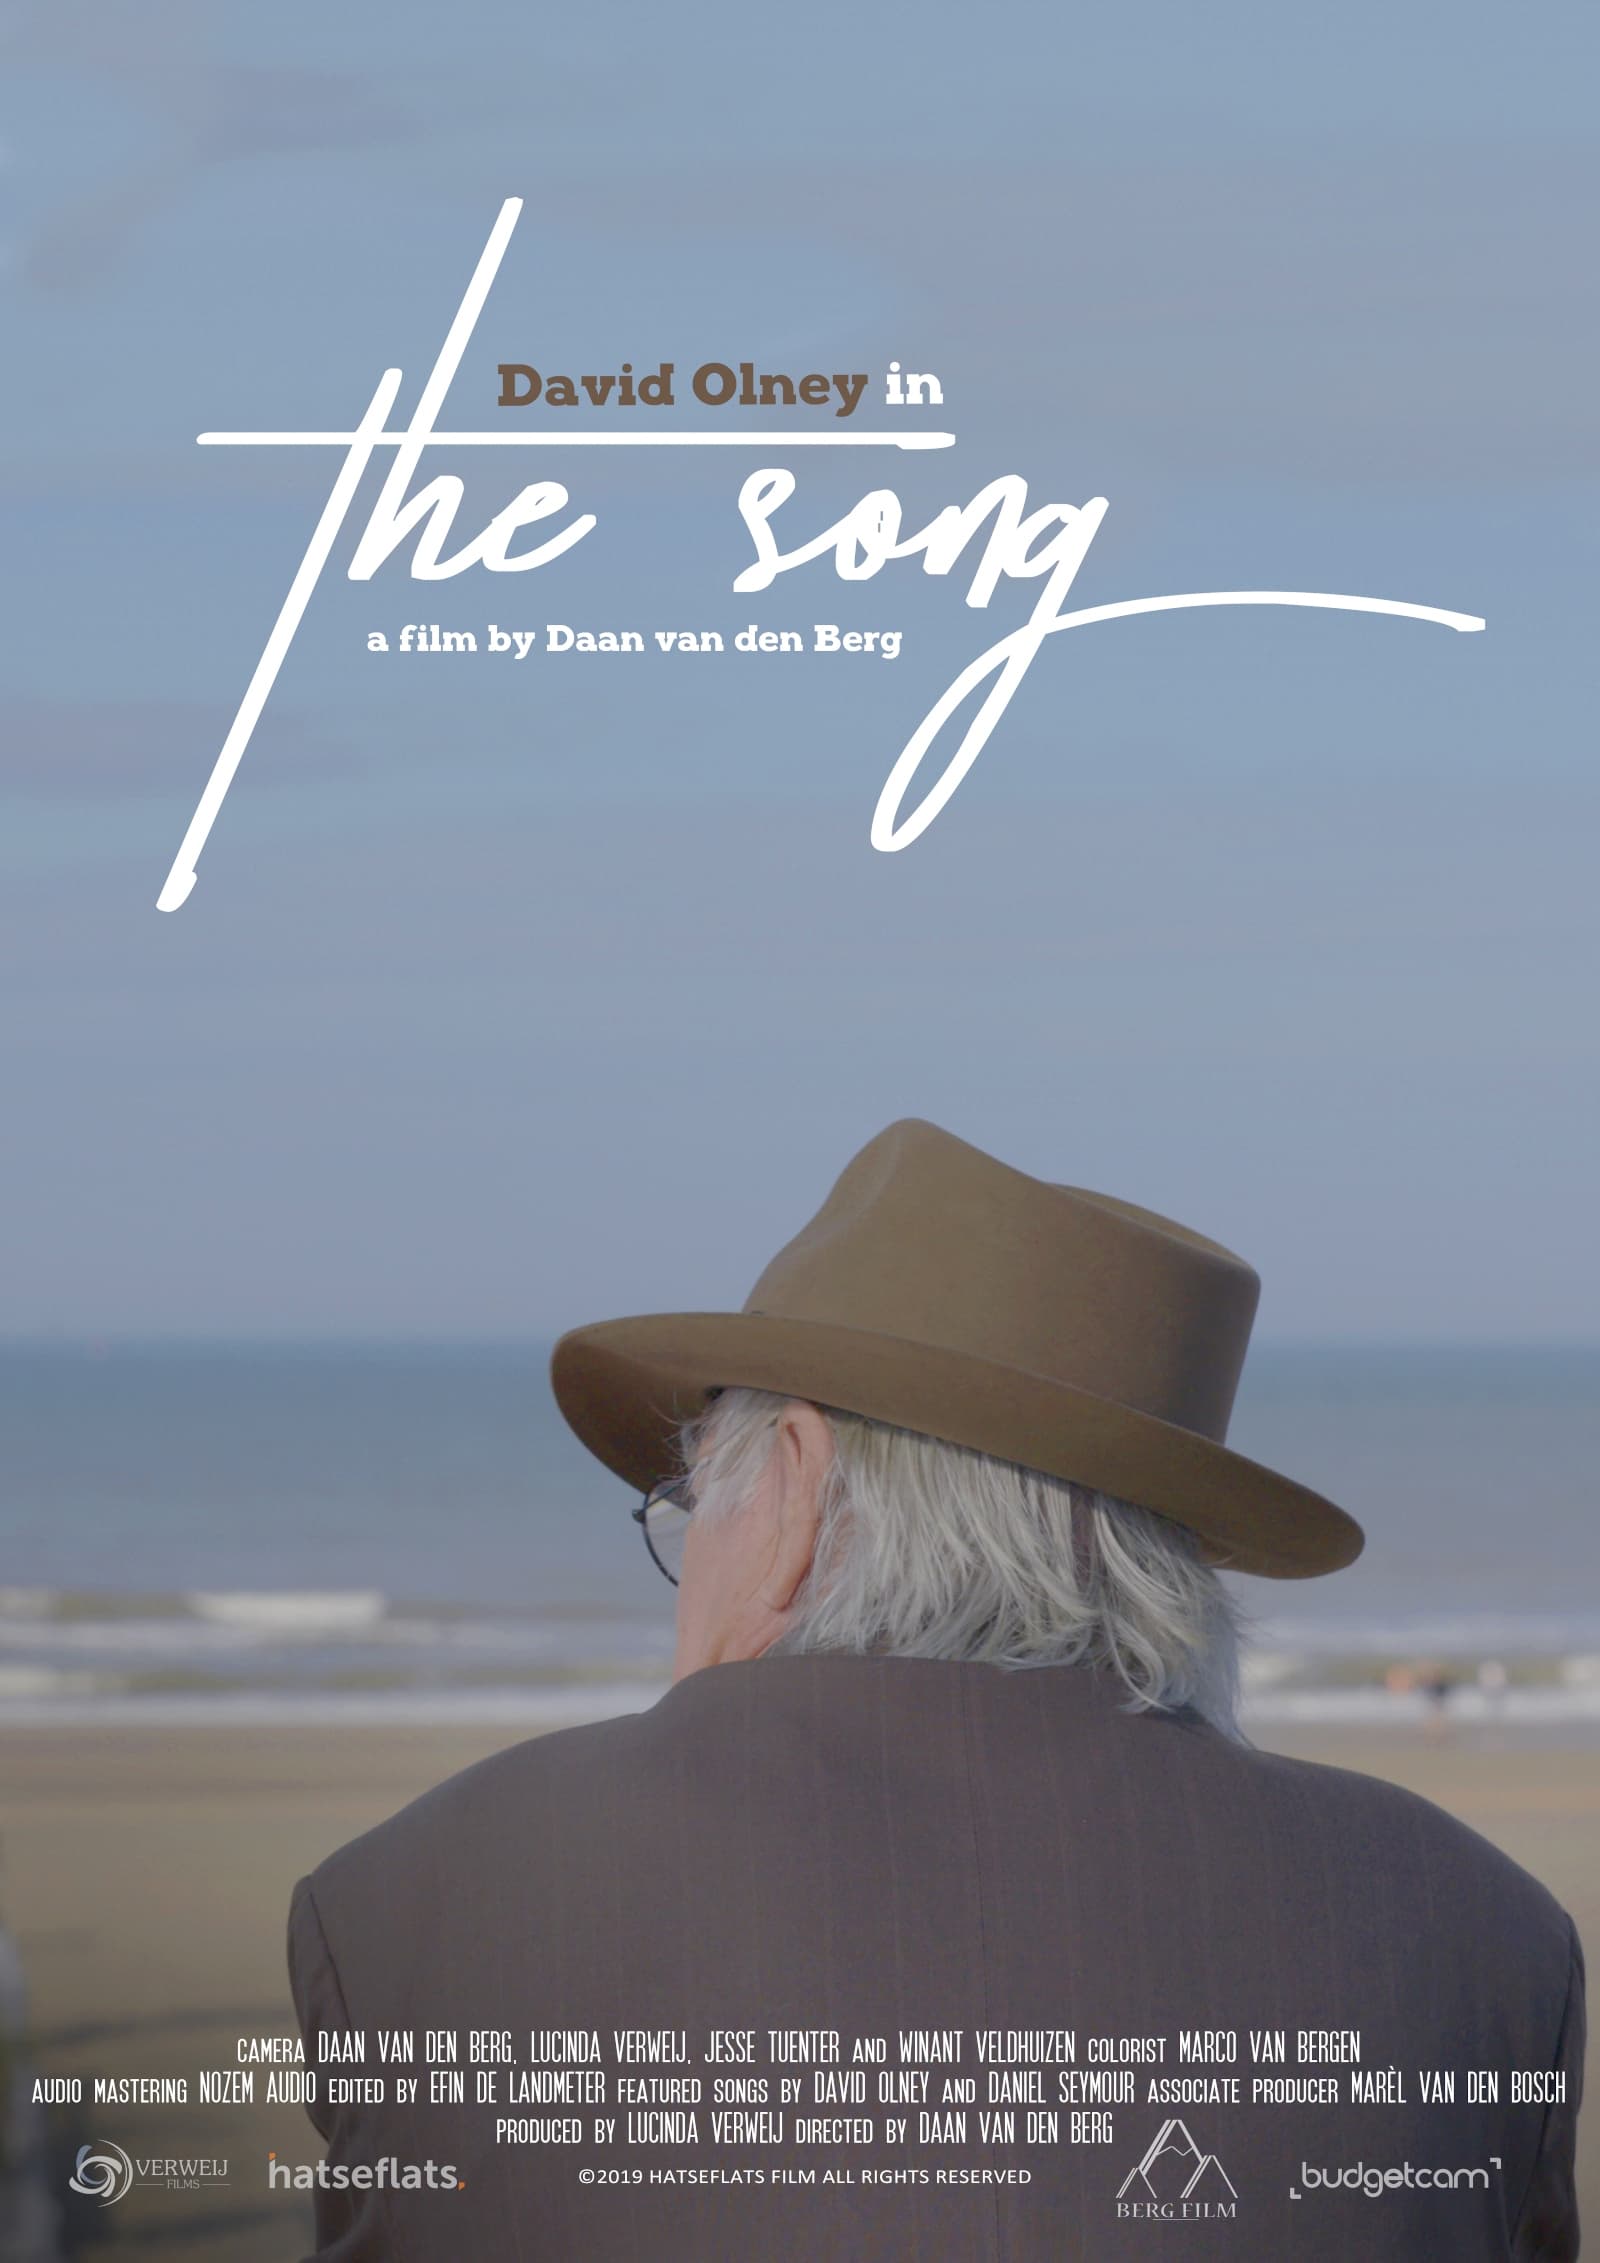 The Song - David Olney